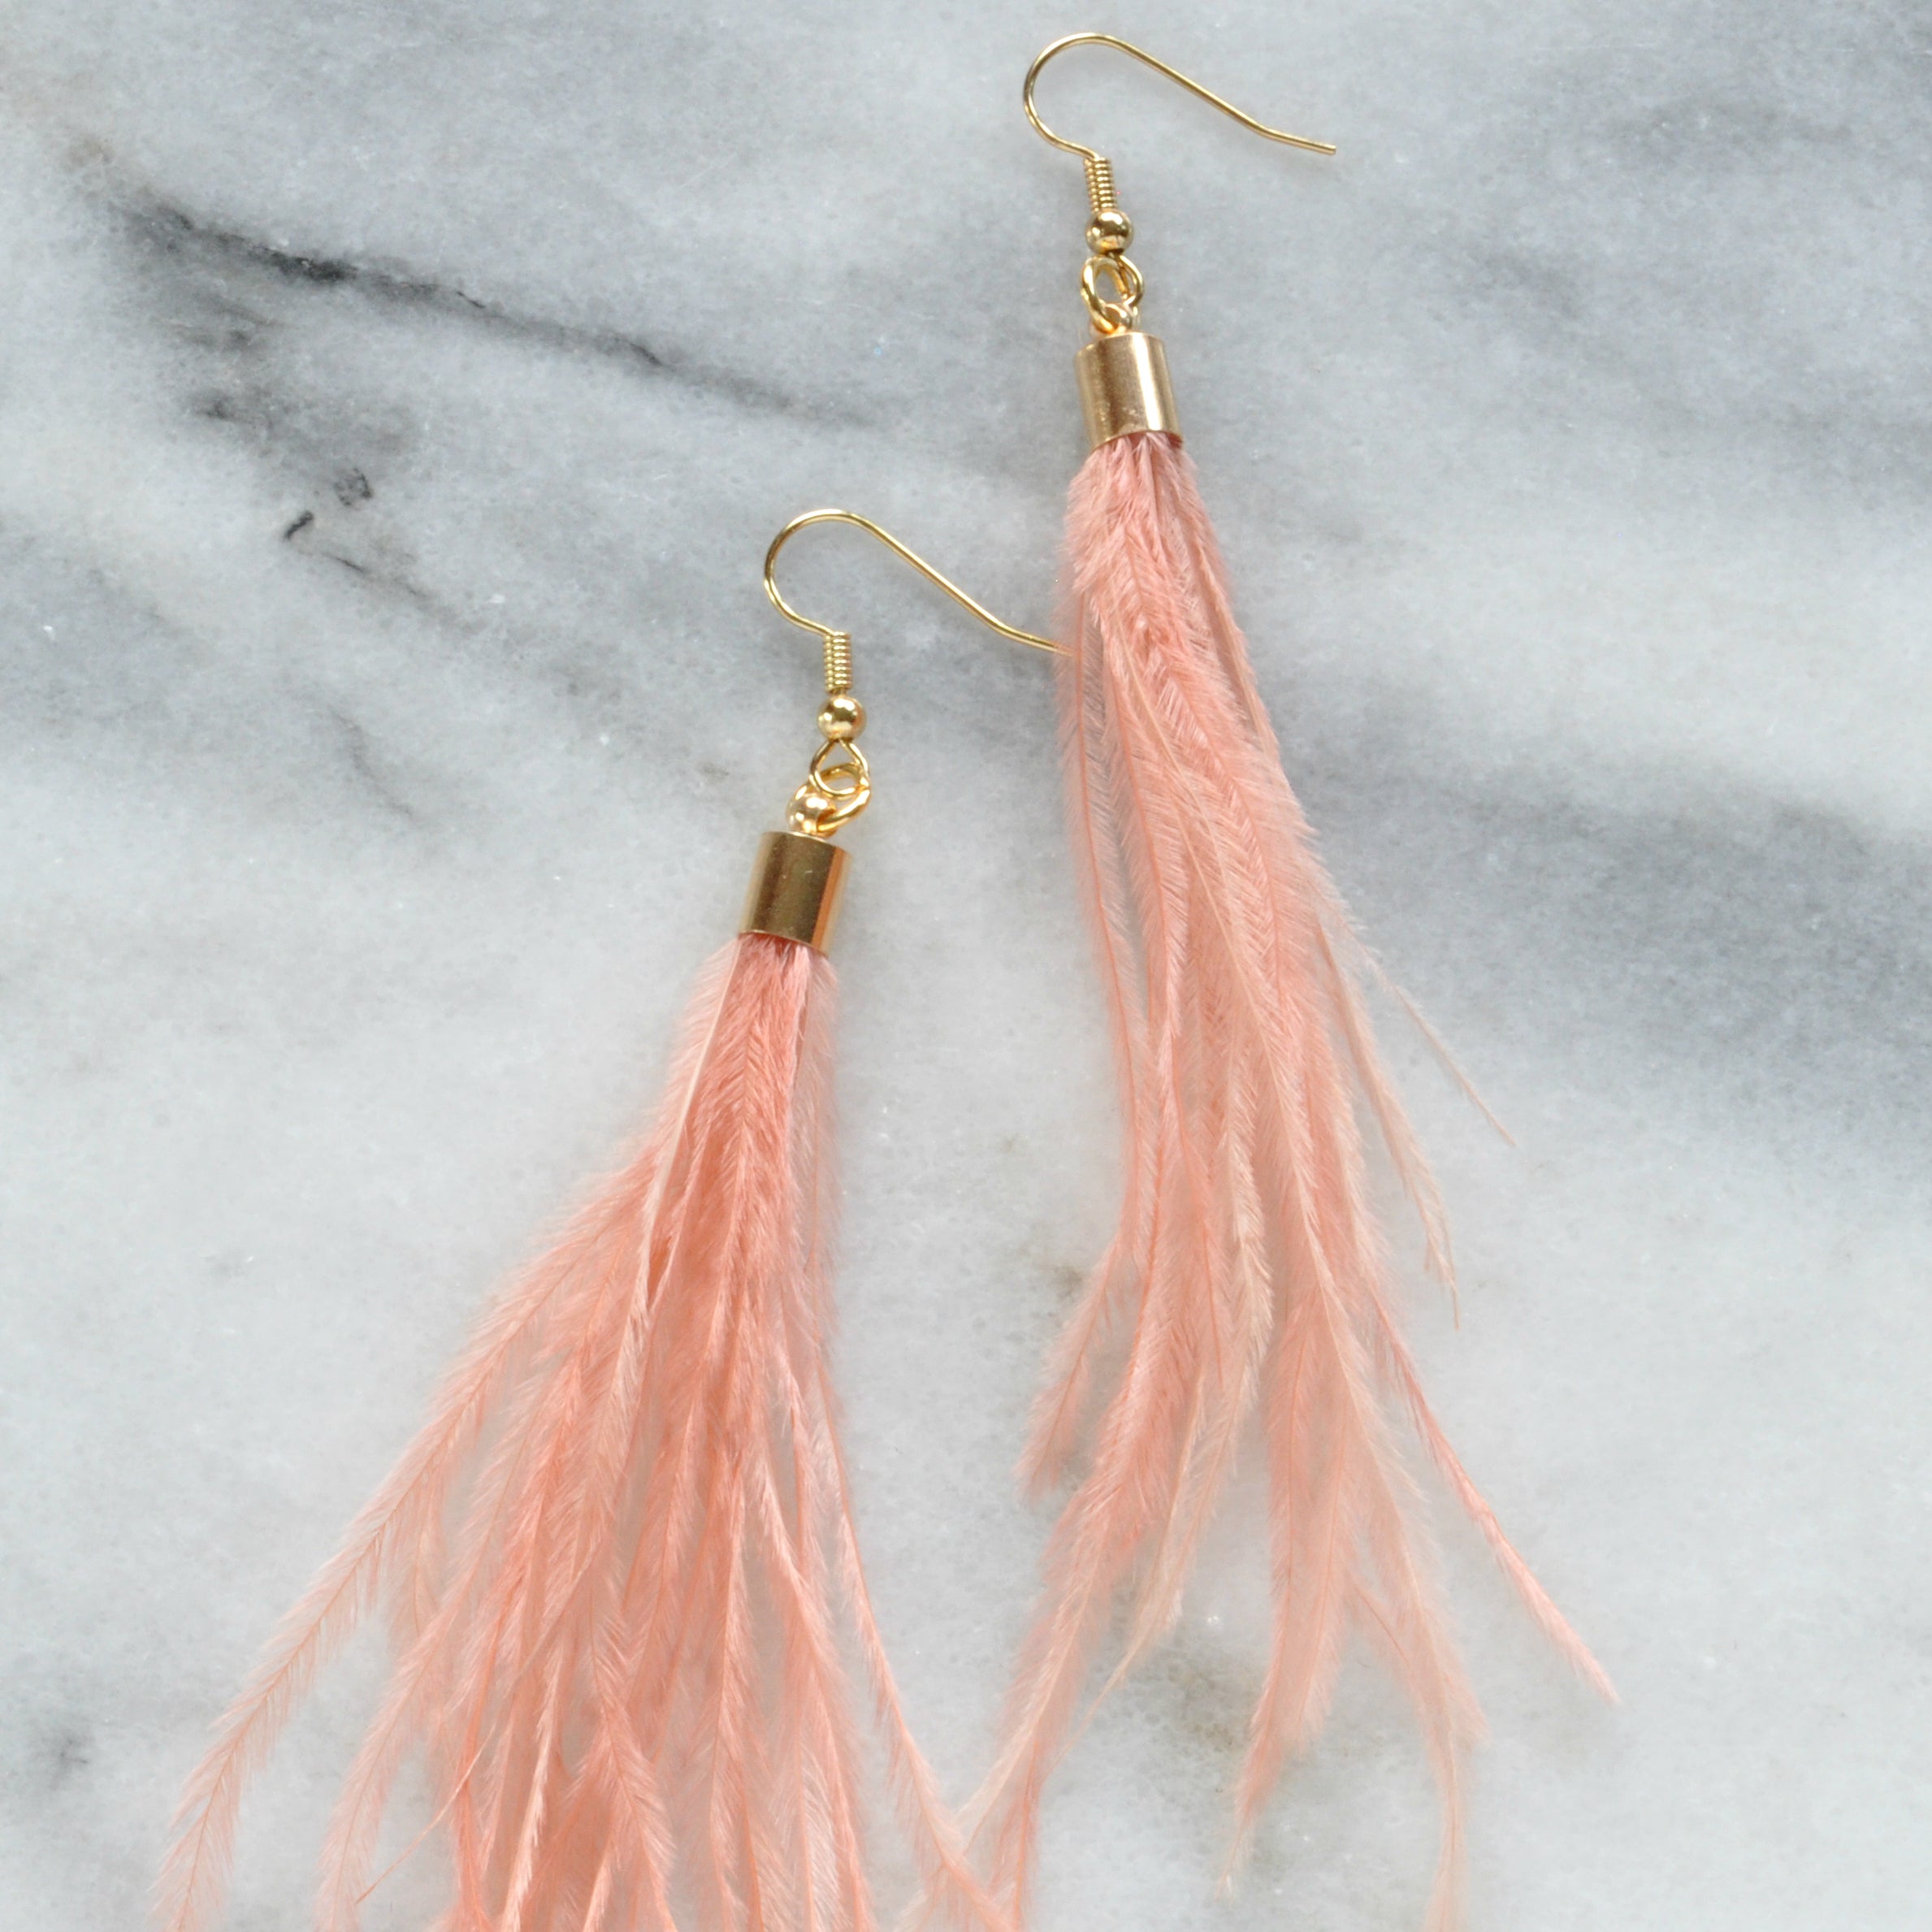 Ostrich Feather Earrings Discontinued Version - CLEARANCE